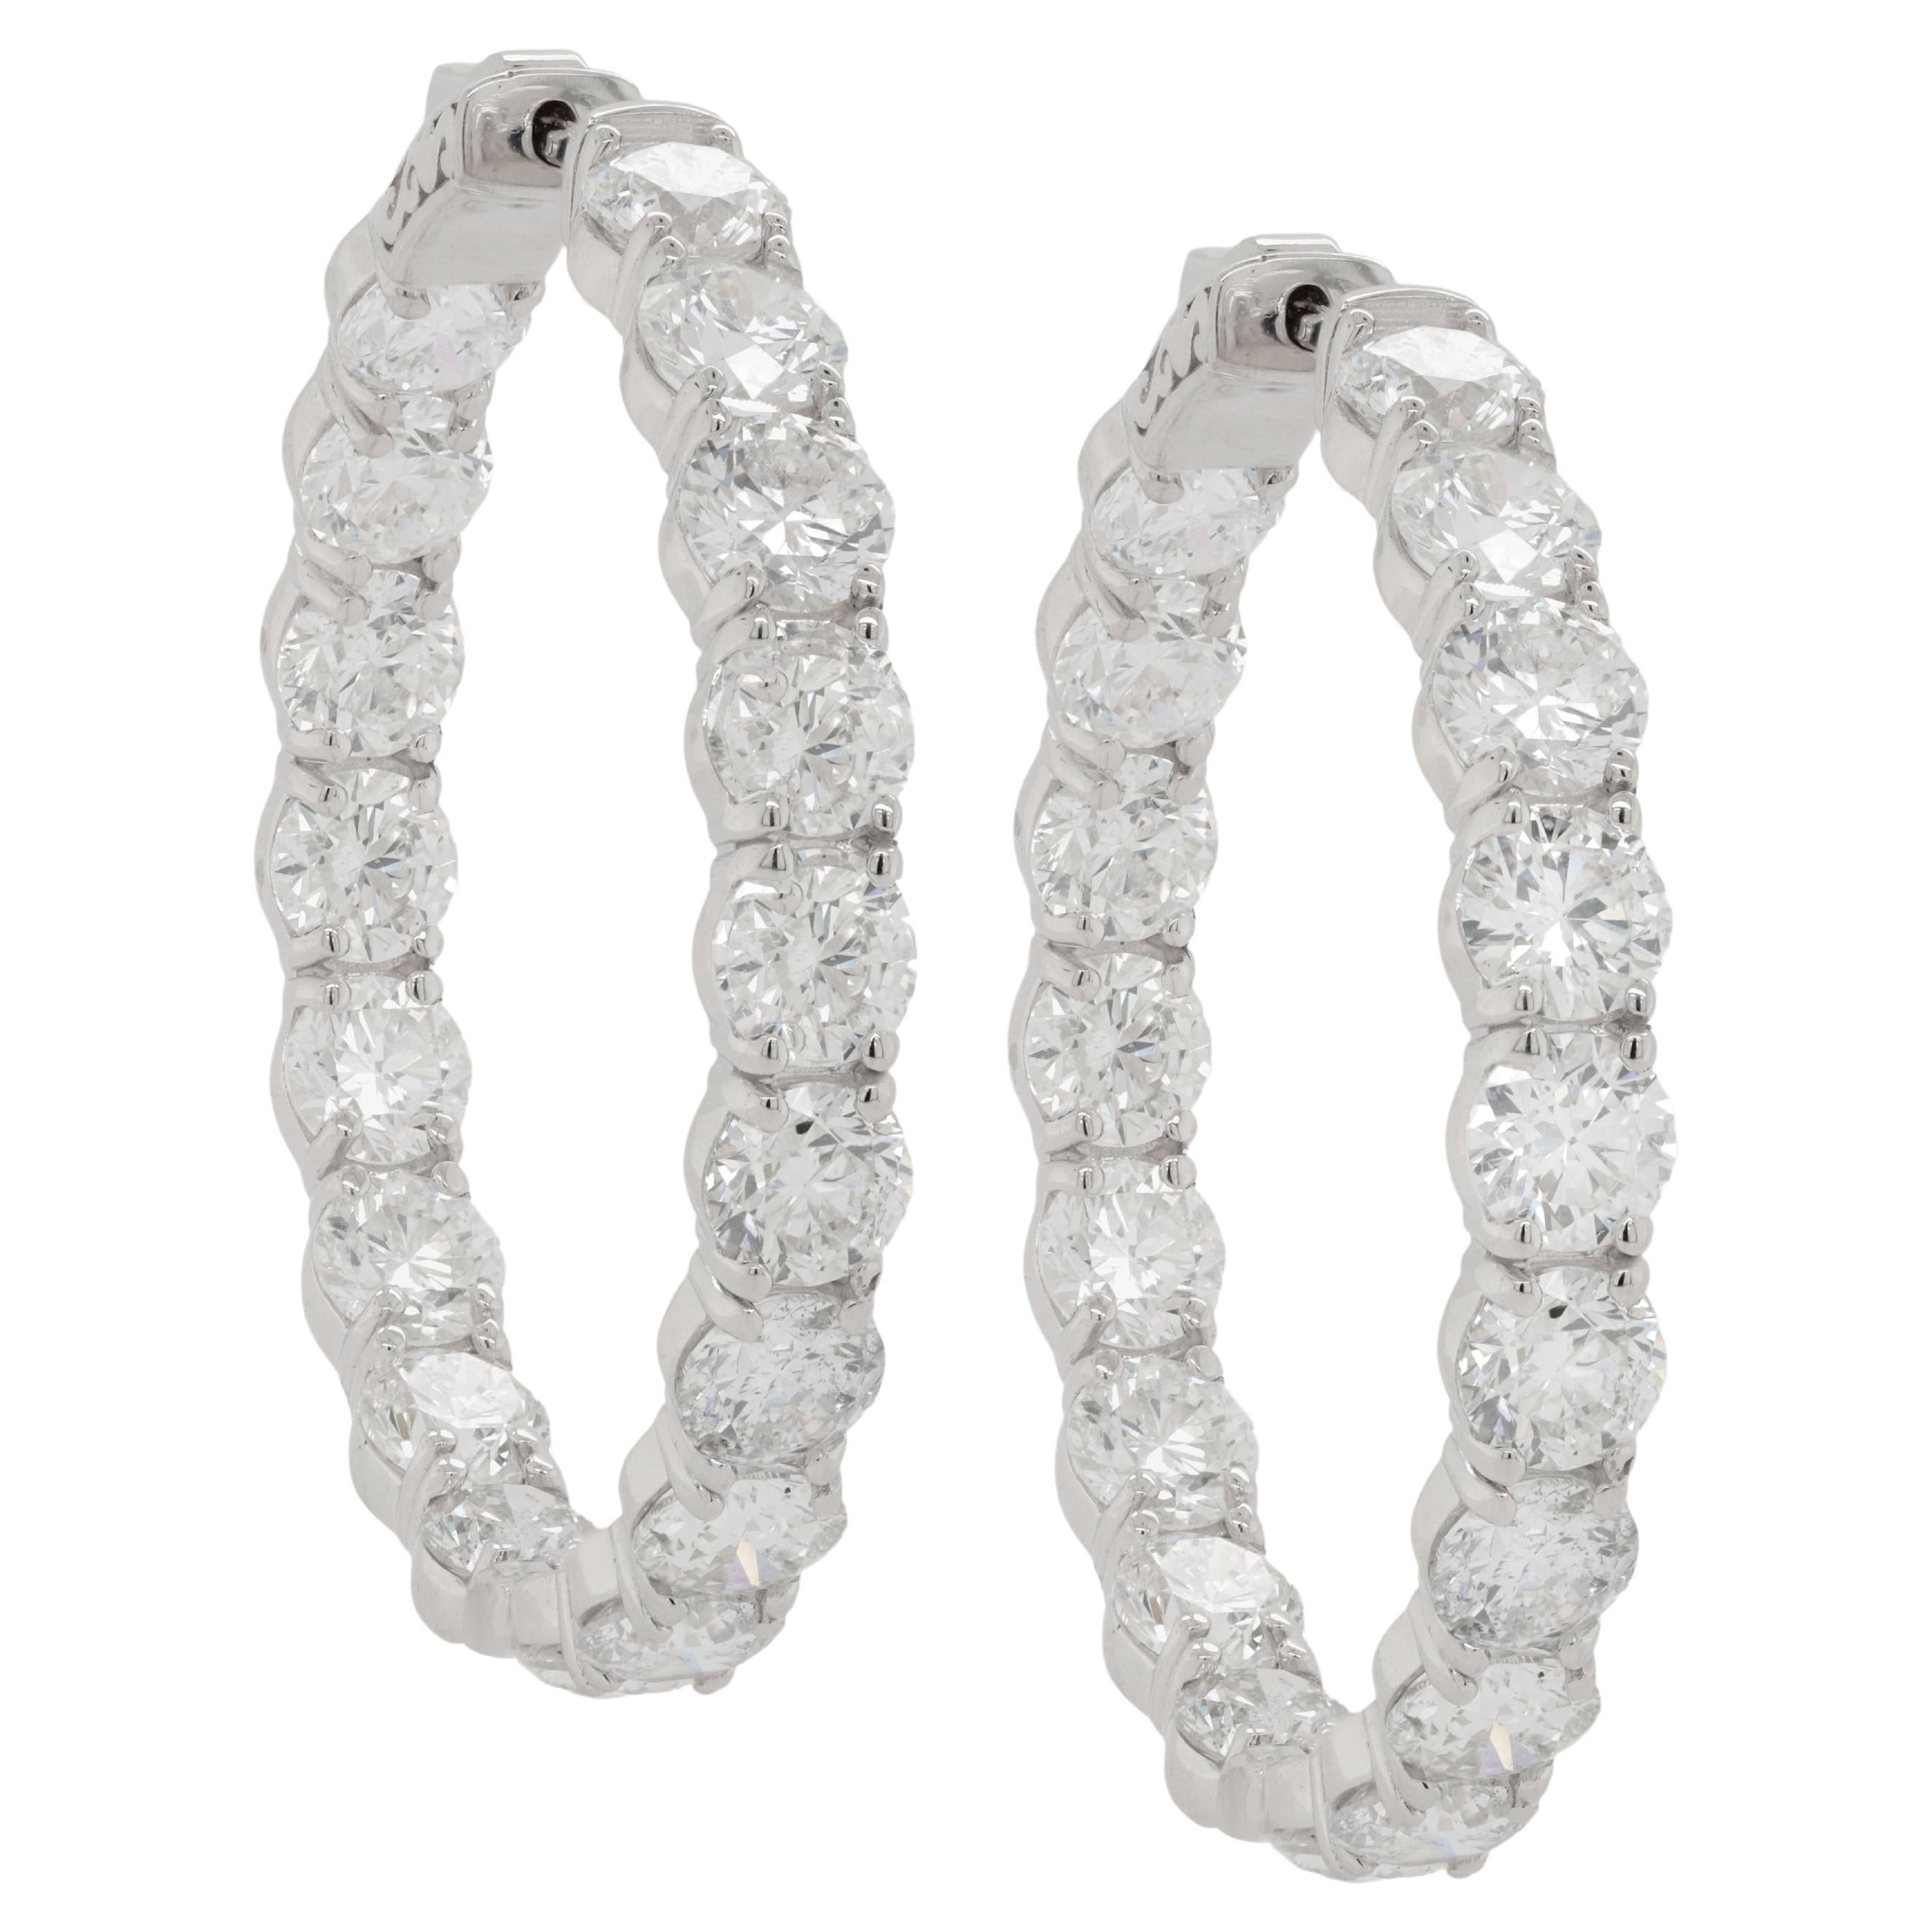 Diana M. 18 kt white gold inside-out hoop earrings adorned with 21.00 cts 